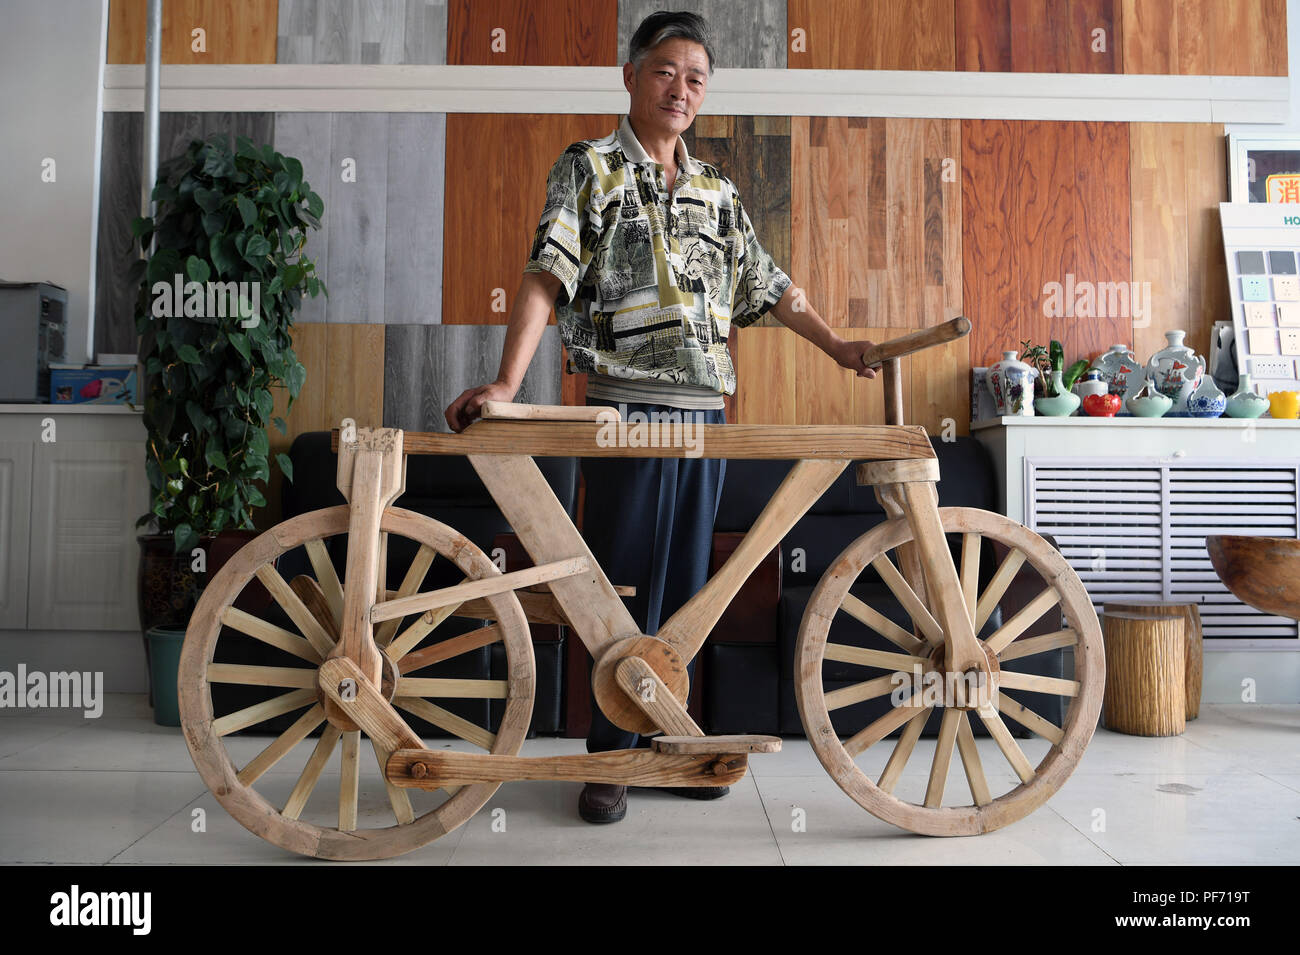 Beijing, China's Gansu Province. 14th Aug, 2018. He Yong shows his wooden bicycle in Liuhu Township of Pingliang City, northwest China's Gansu Province, Aug. 14, 2018. The 55-year-old farmer He Yong successfully made a 1.8-meter-long and 0.98-meter-high wooden bicycle in 2017. The bike was made purely of wood, including walnut and elm. Credit: Fan Peishen/Xinhua/Alamy Live News Stock Photo